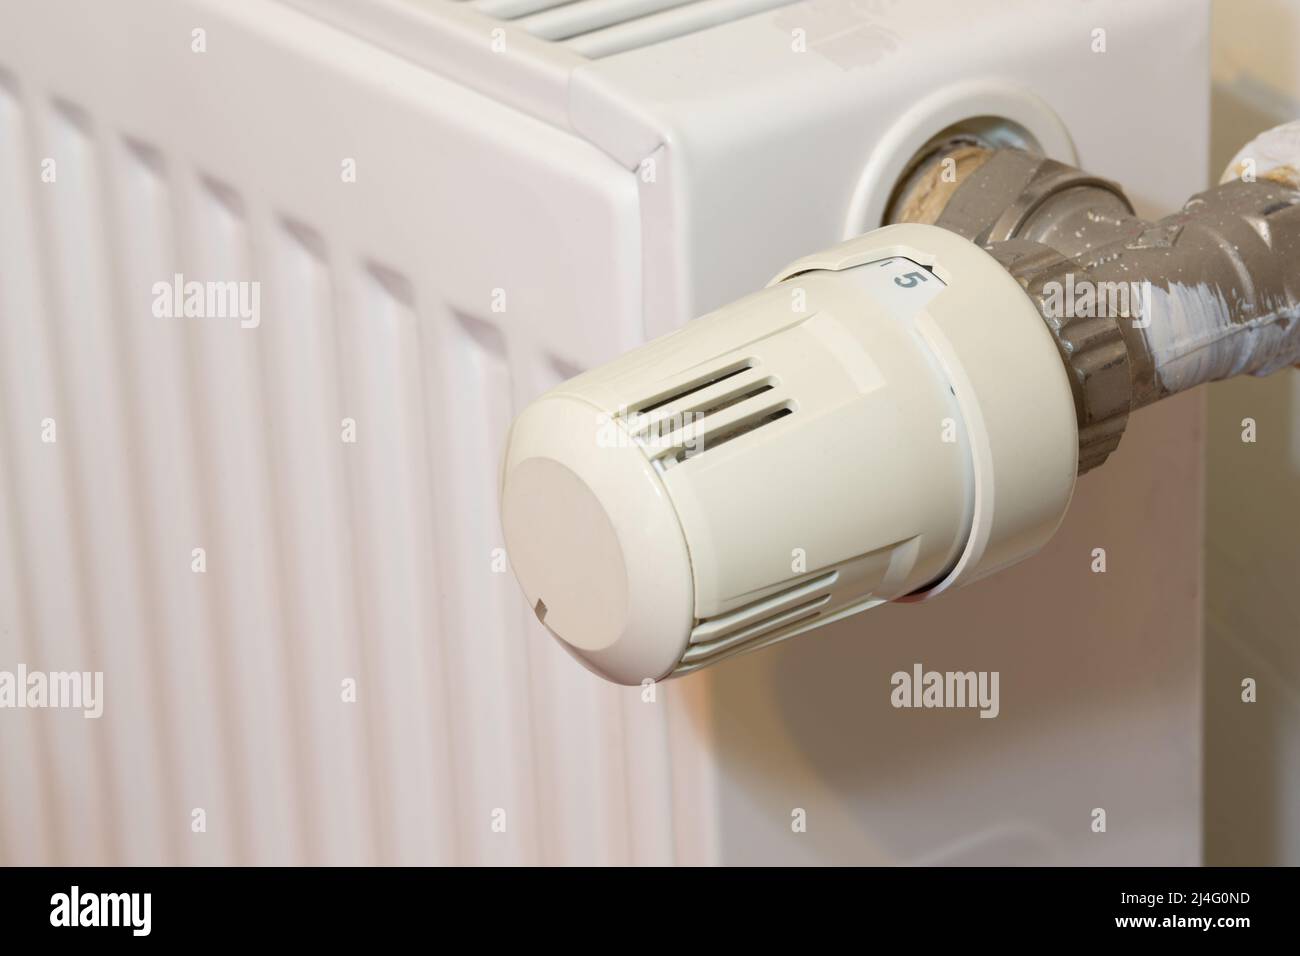 Heating radiator and temperature knob. The temperature is at the highest level of 5. Heater controller in selective focus. Stock Photo